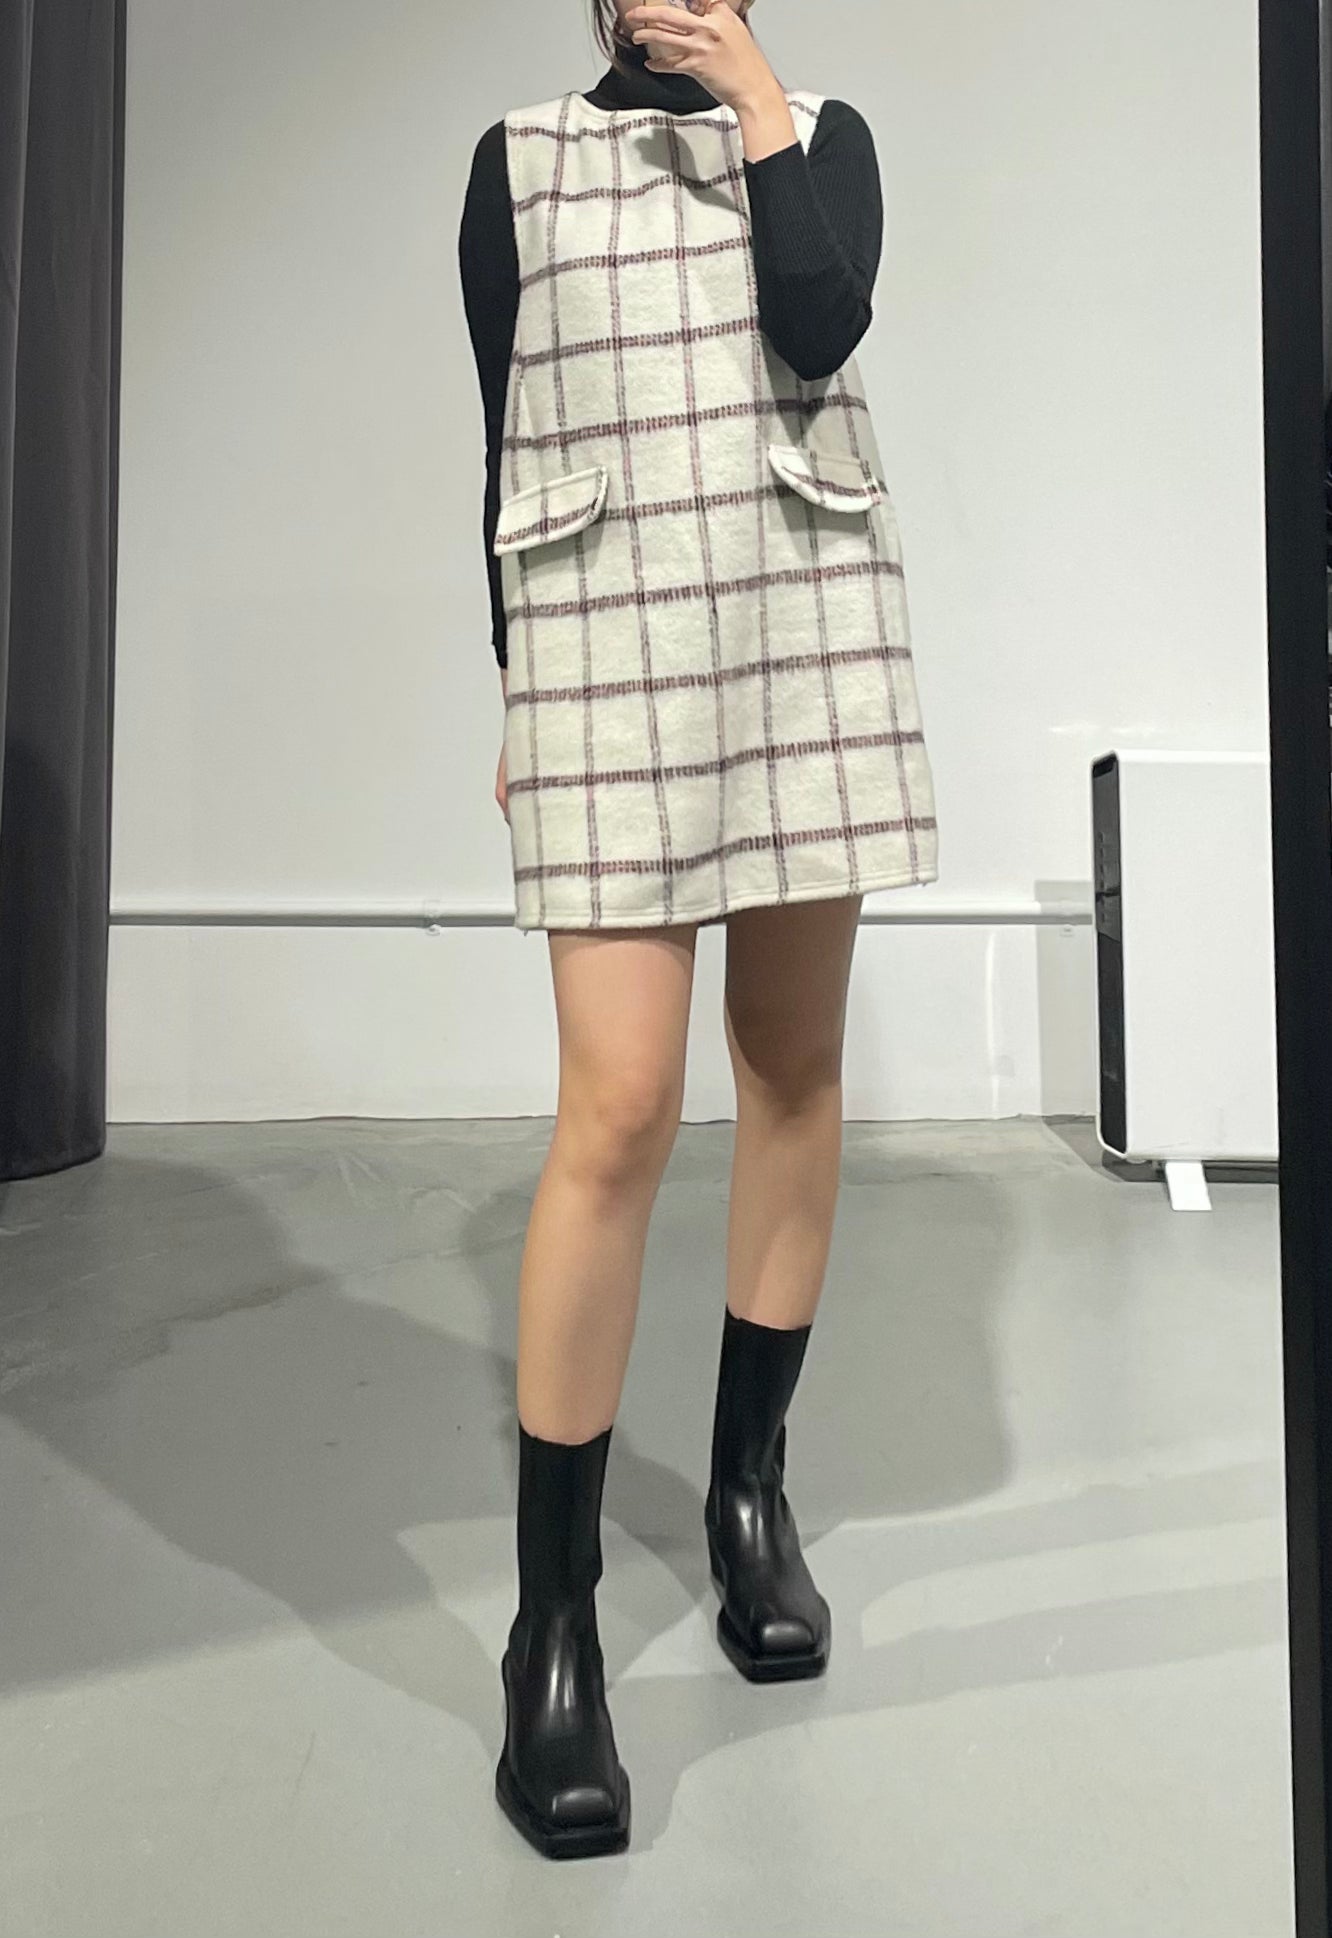 Forming Winter Check dress